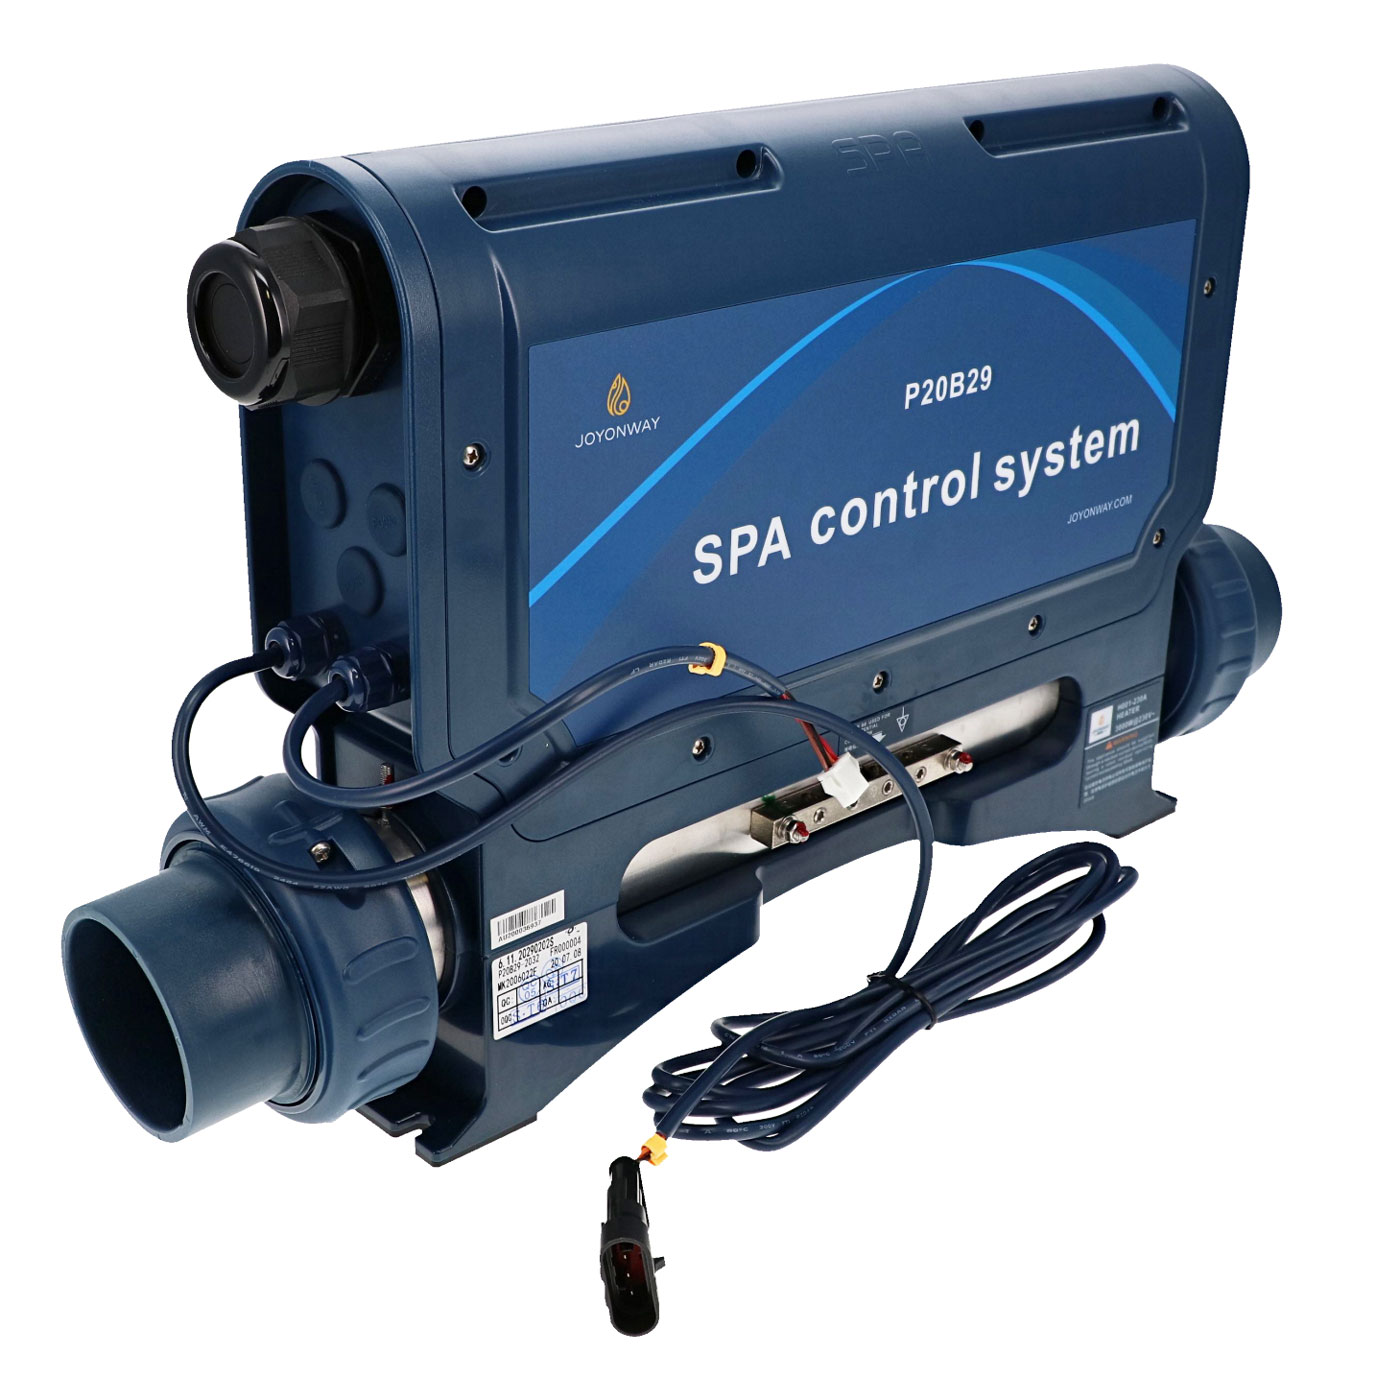 Control system P20B29 with heater for spa